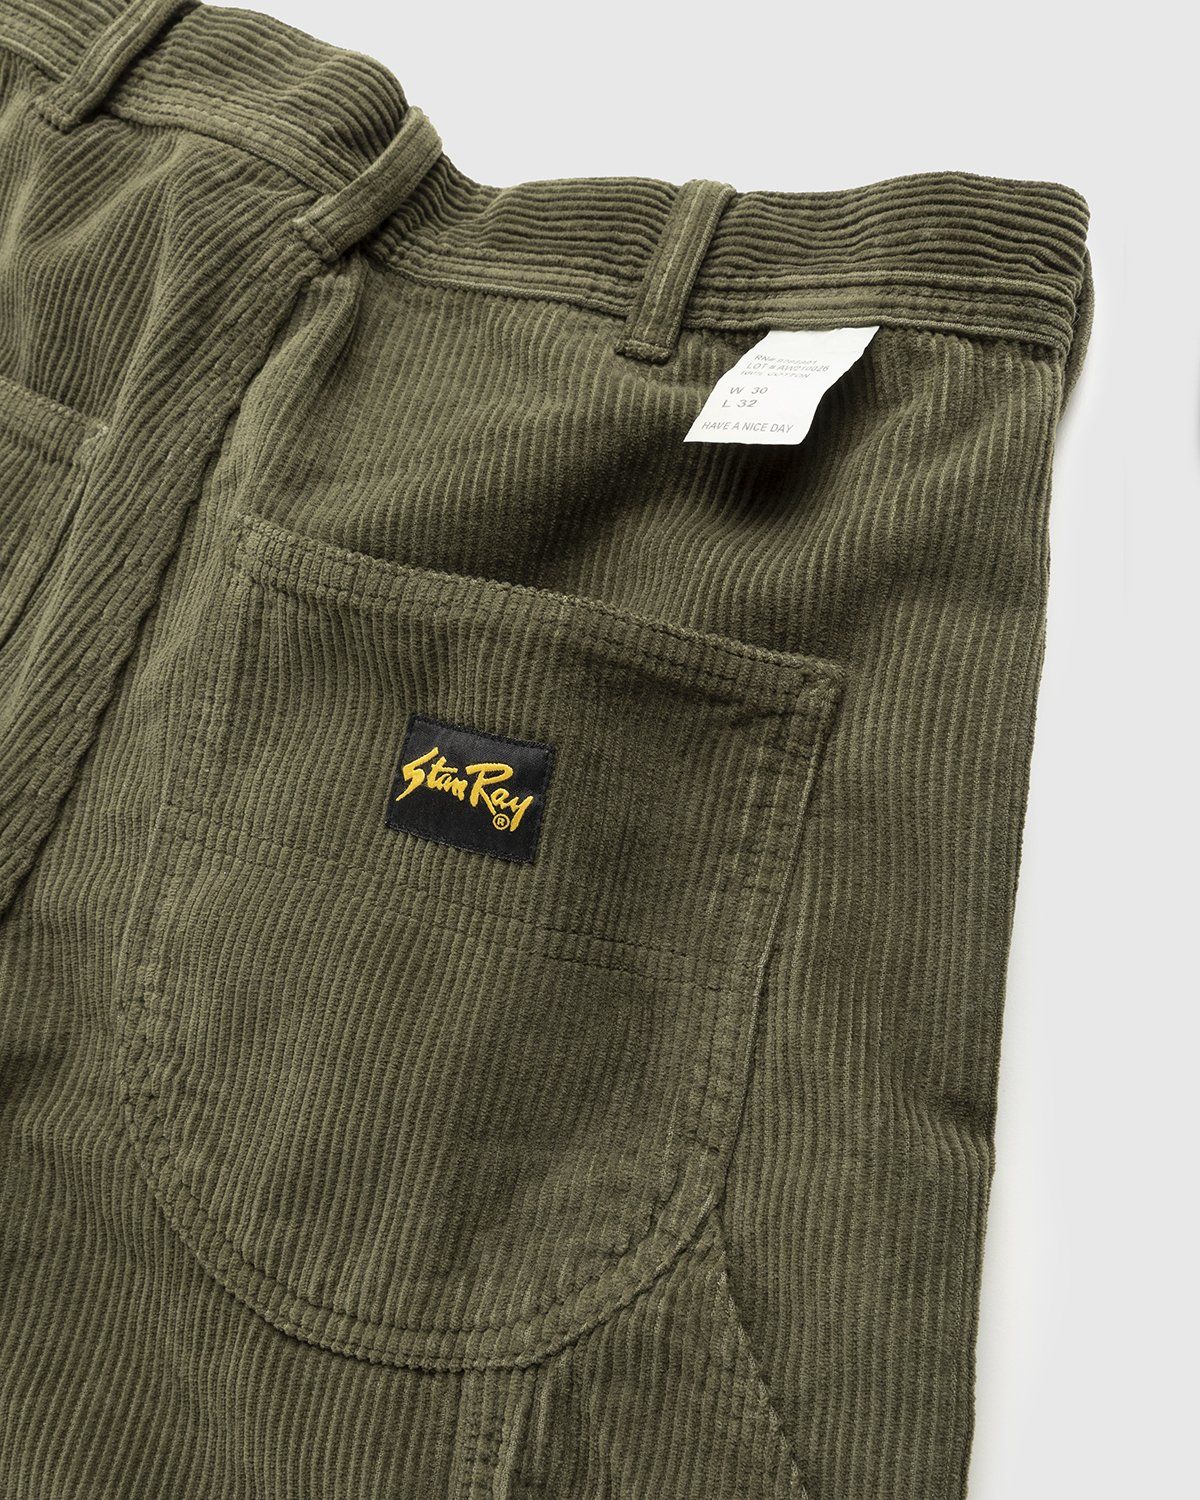 Stan Ray – 80s Painter Pant Olive Cord - Pants - Green - Image 6